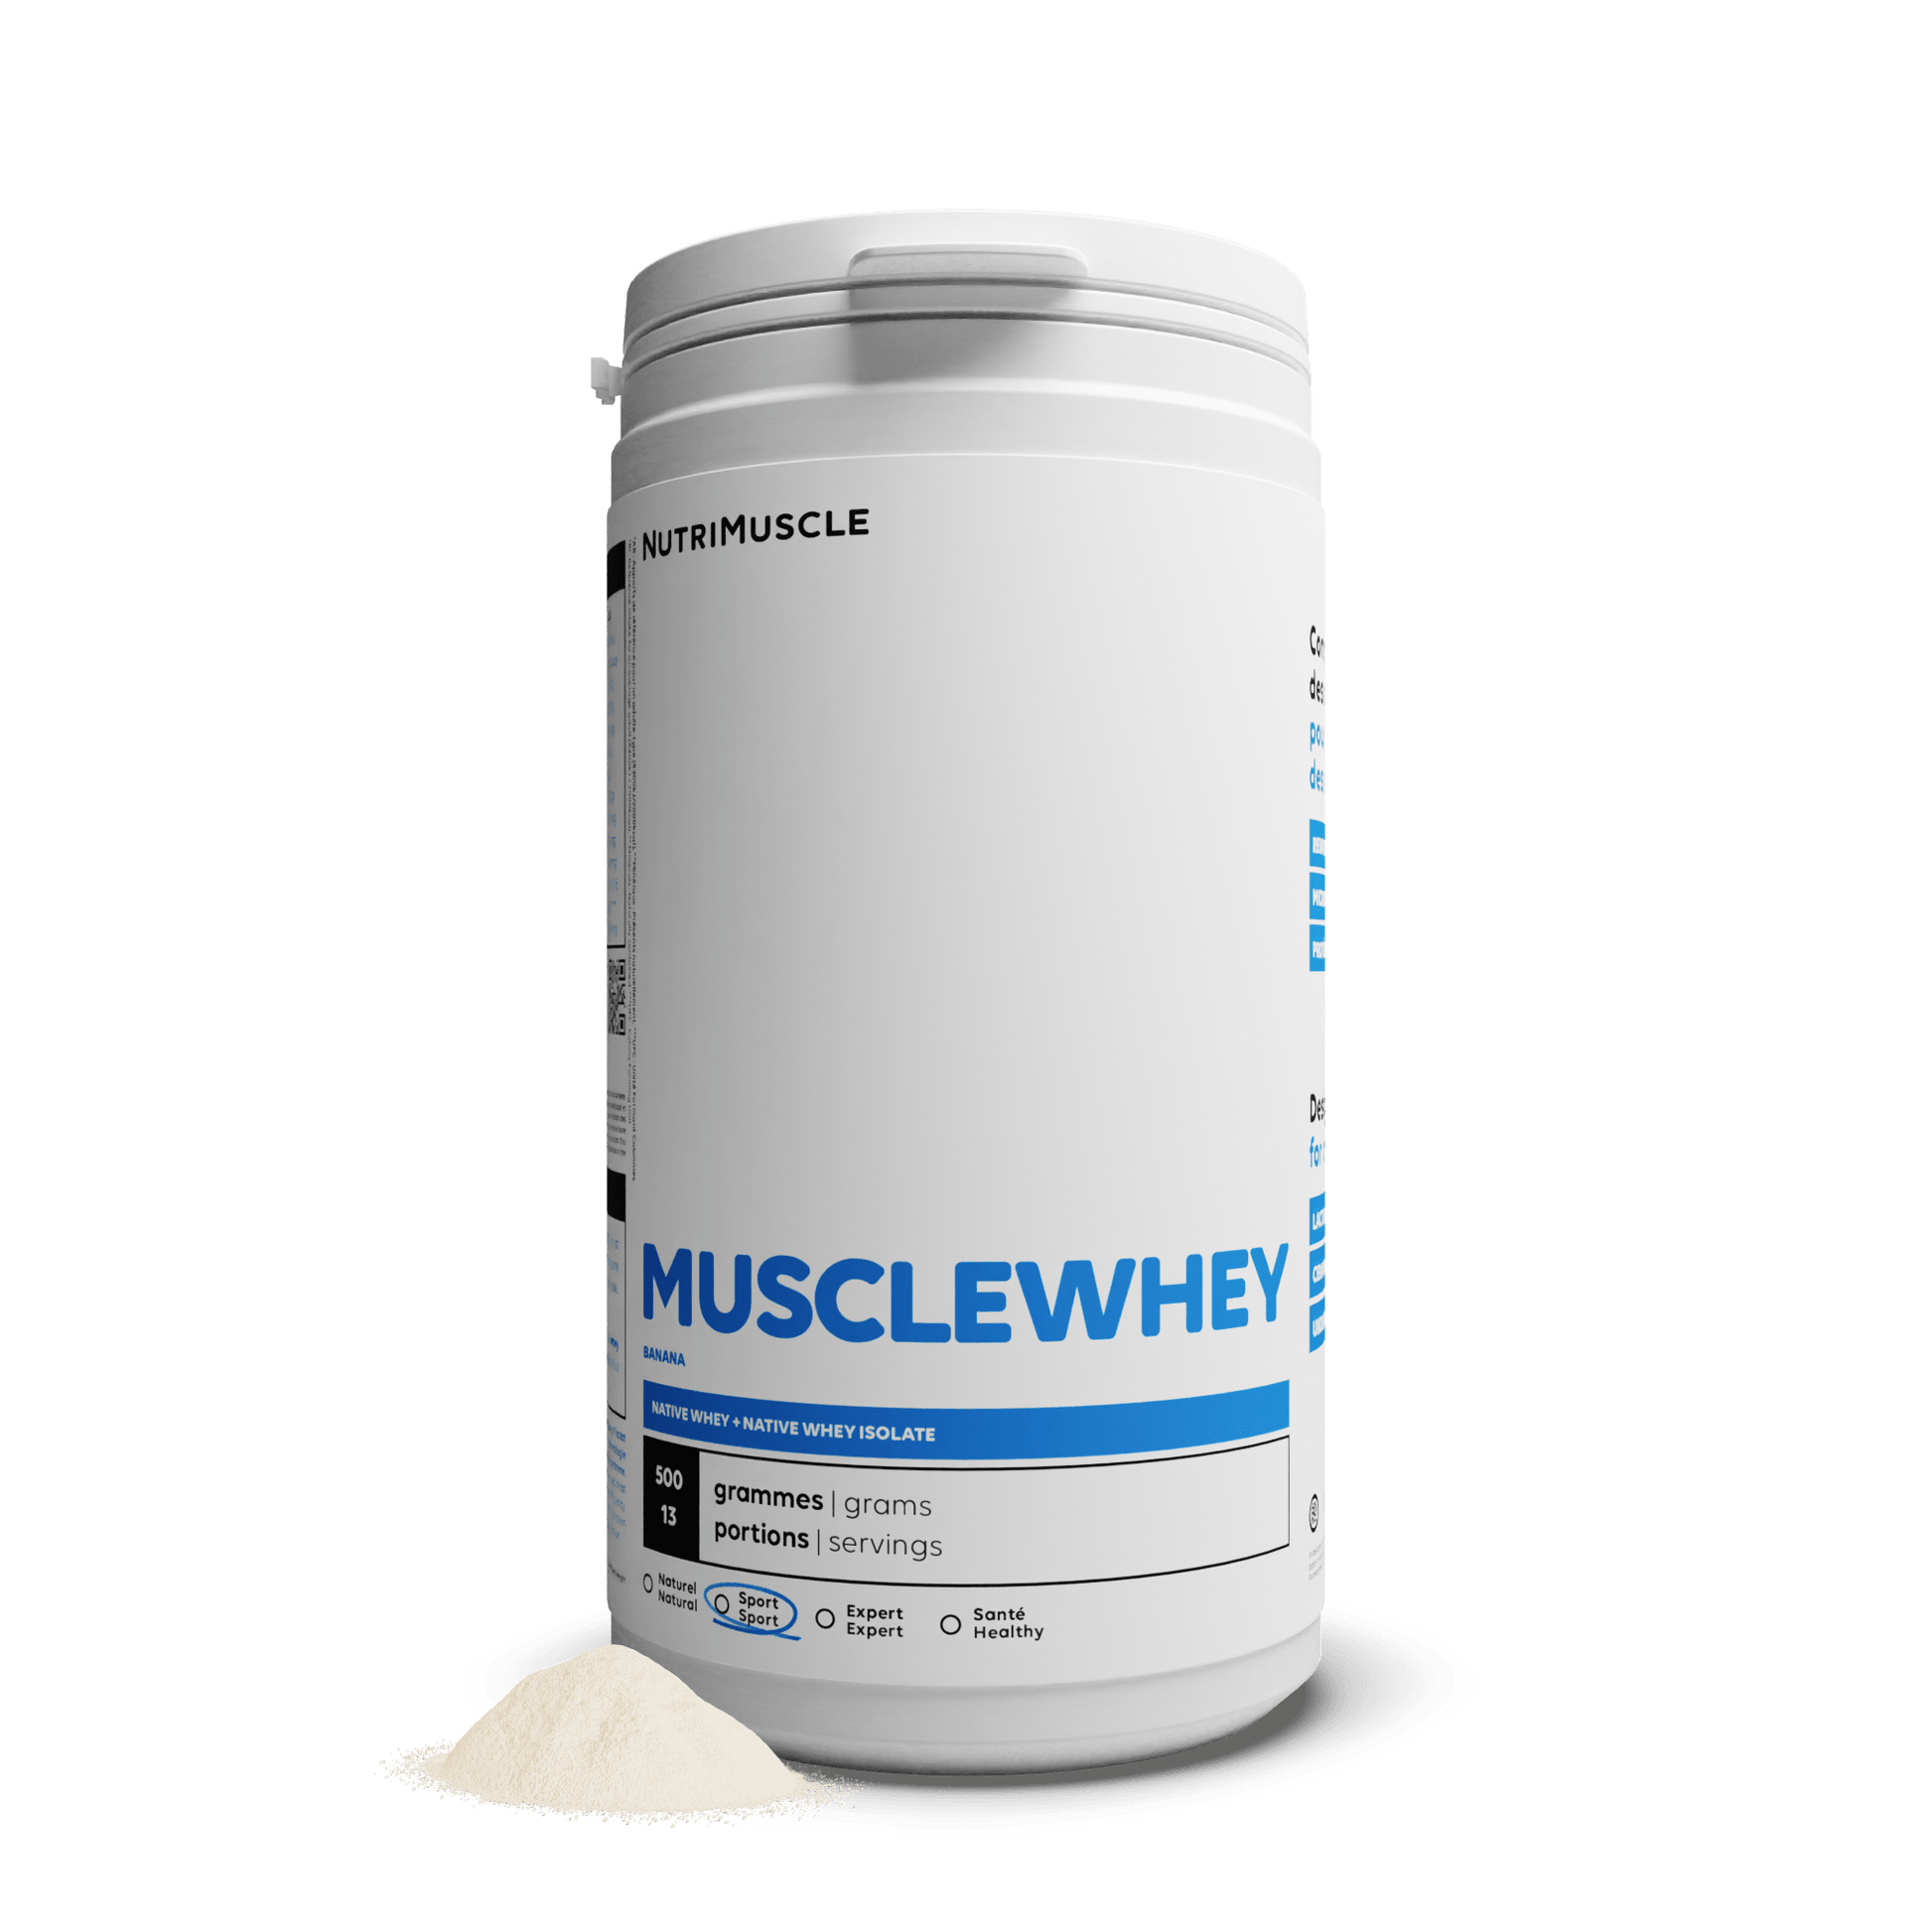 Nutrimuscle Protéines Banane / 500 g Musclewhey - Mix Protein